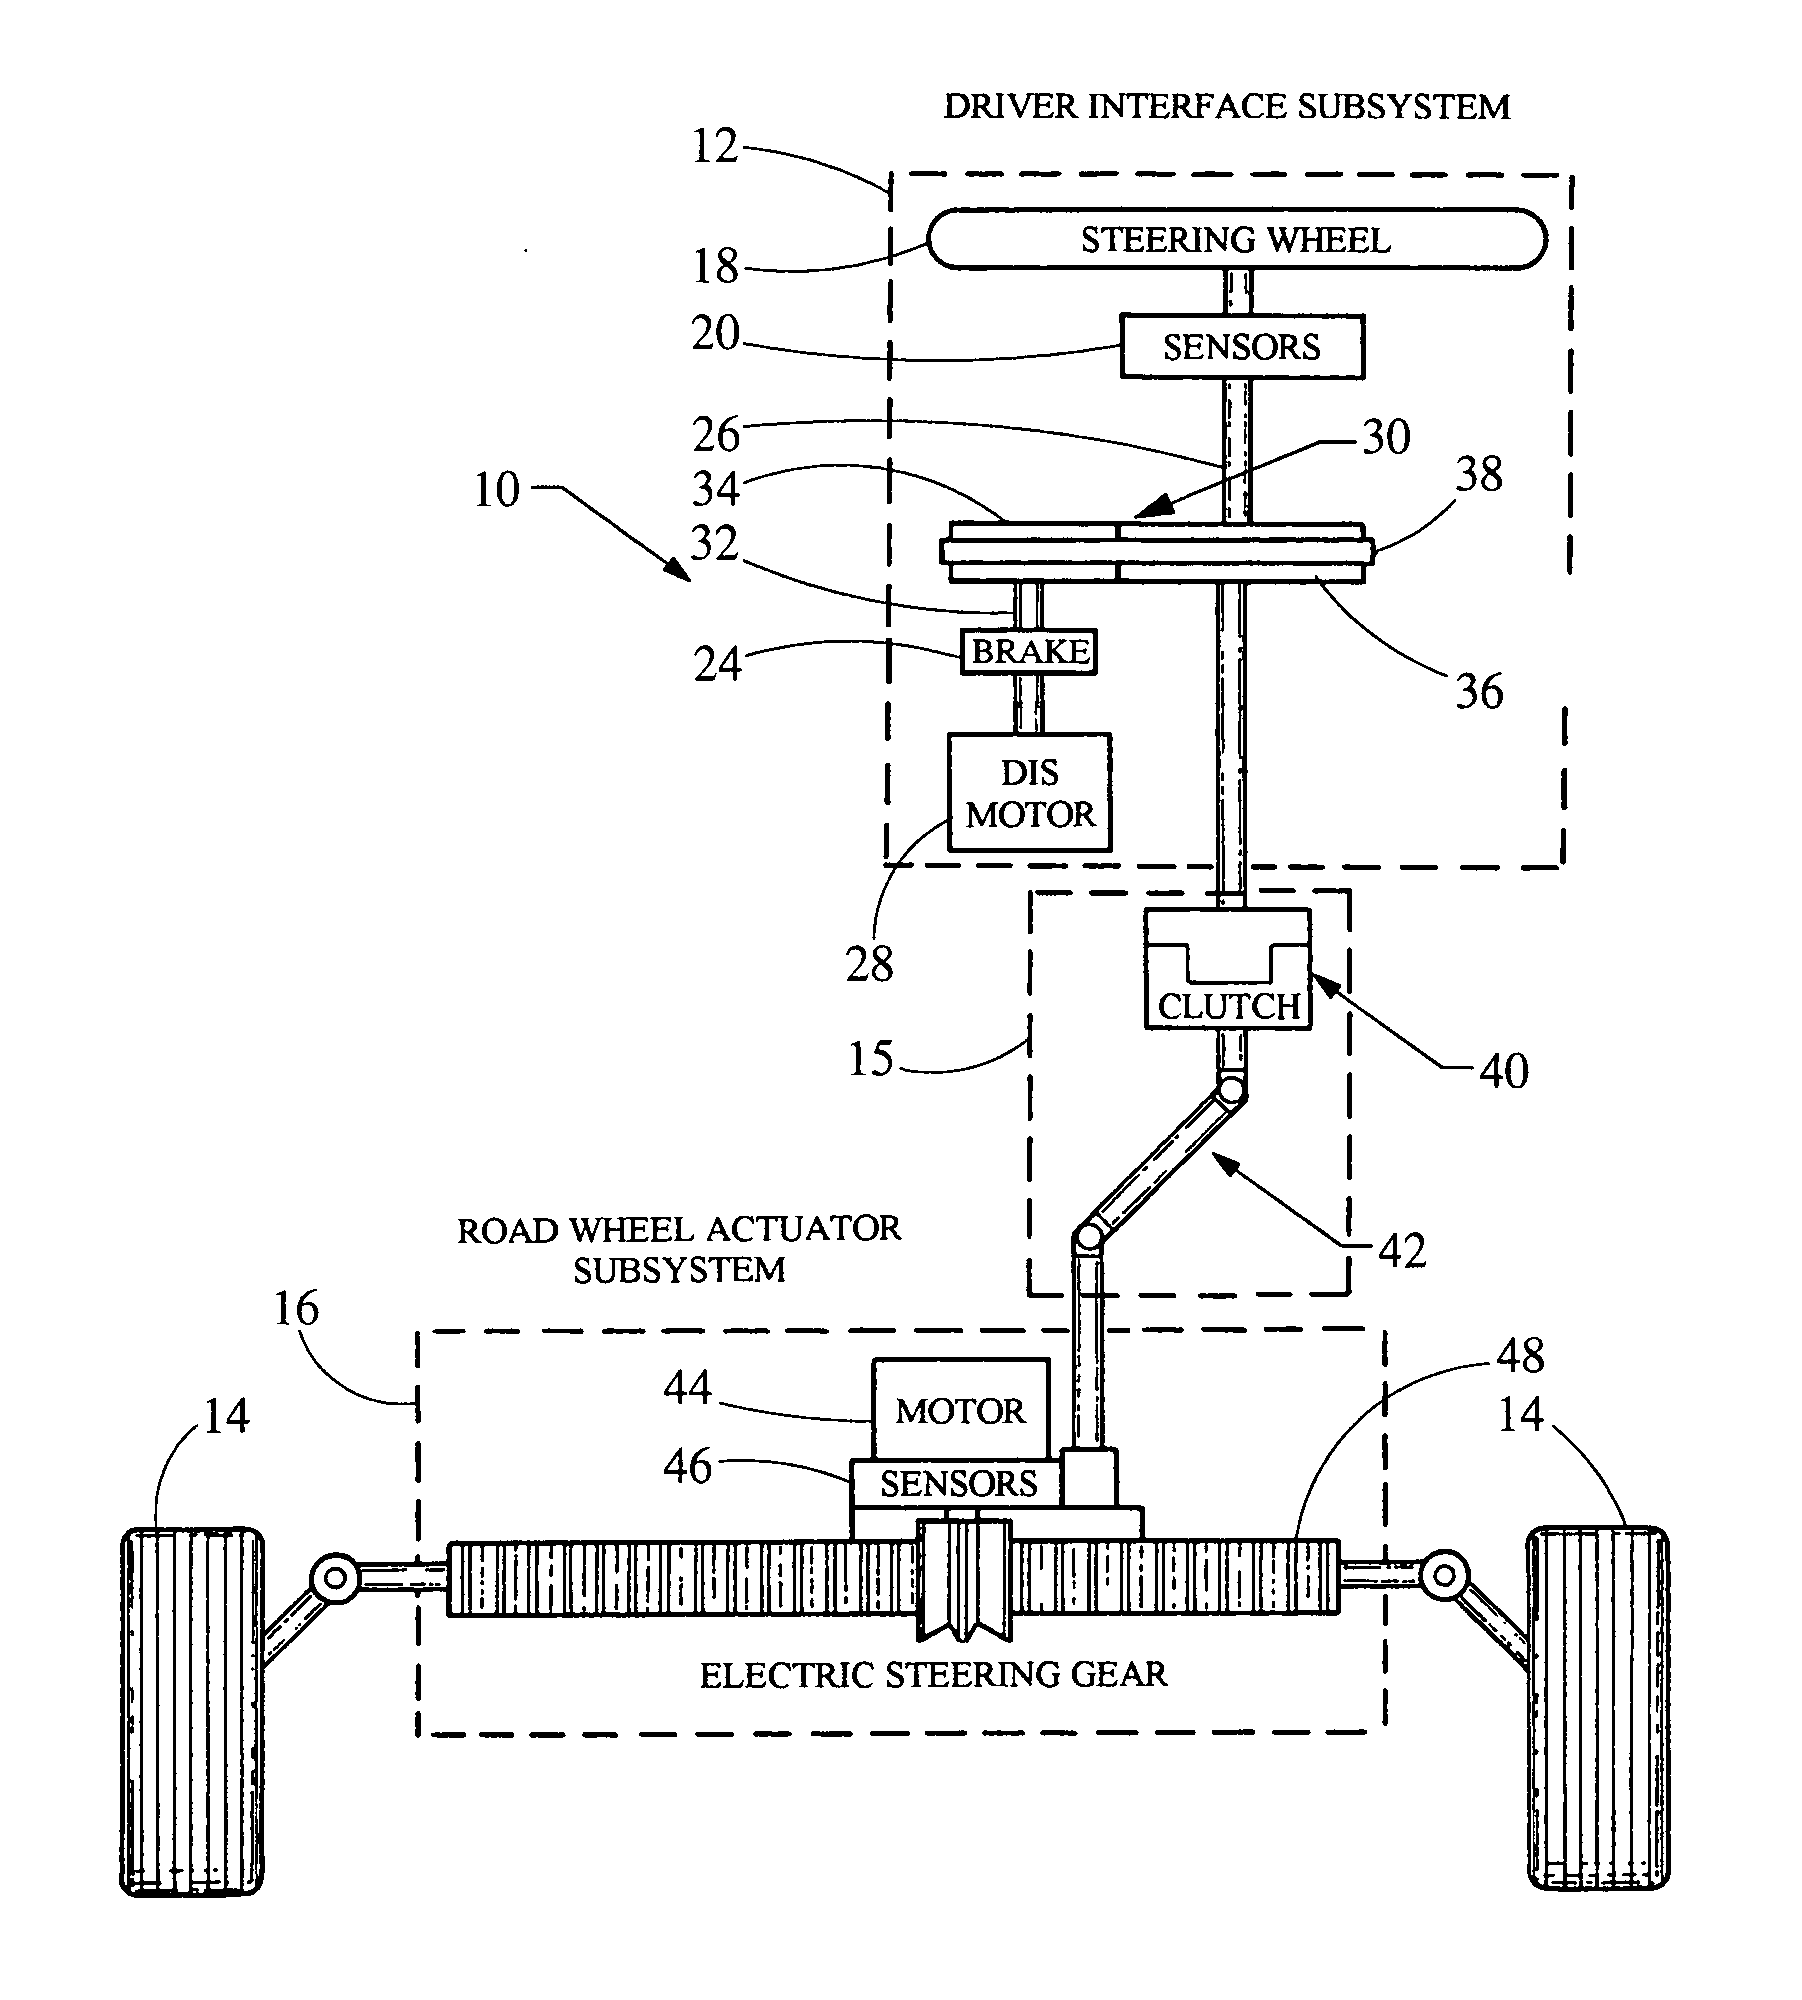 End of travel system and method for steer by wire systems